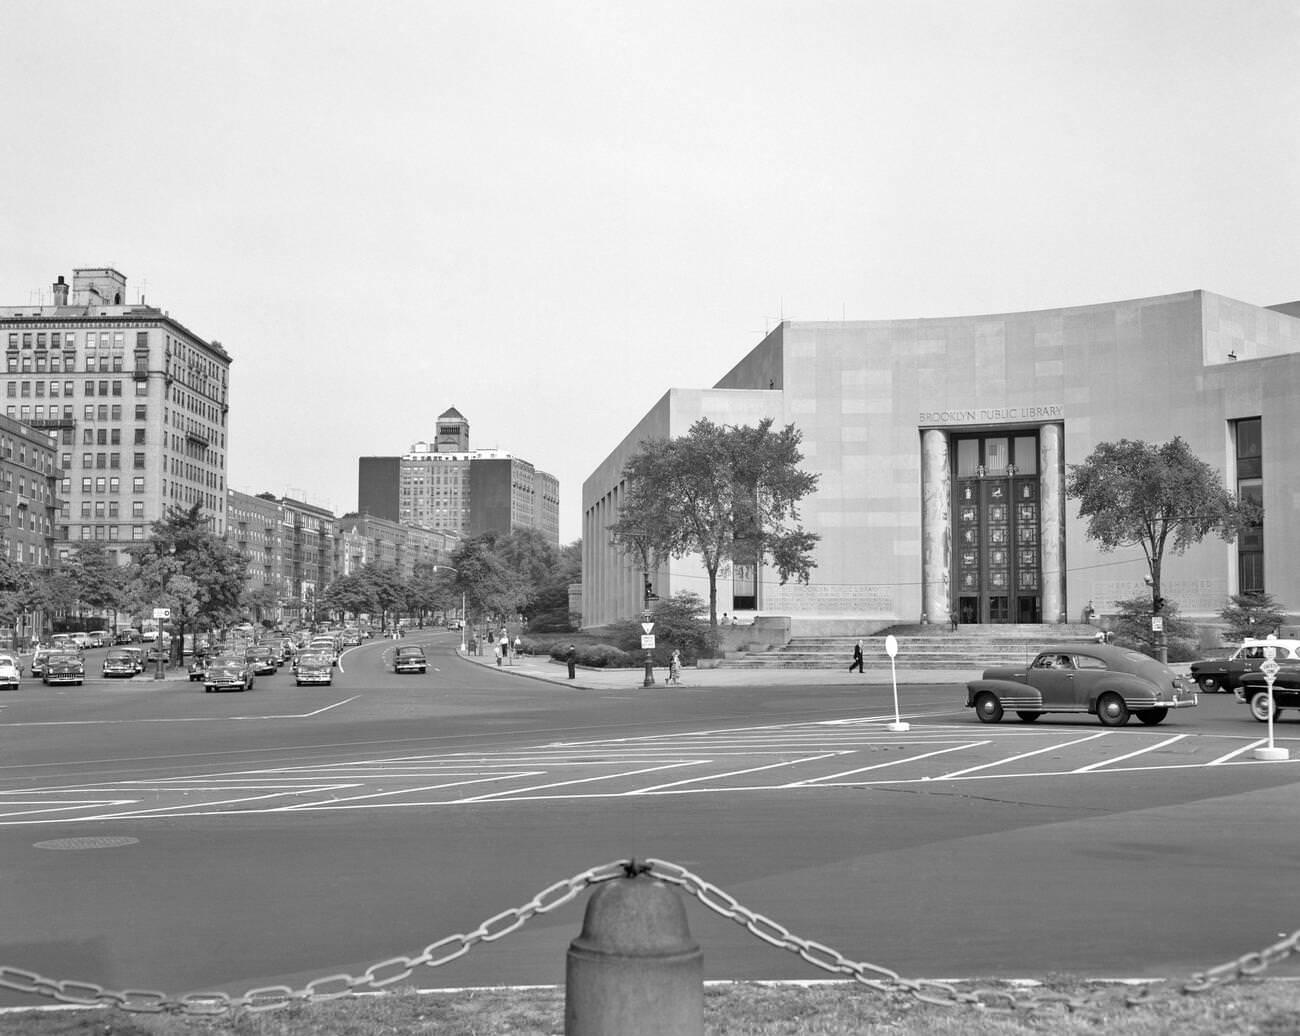 Brooklyn Public Library Seen From Grand Army Plaza Looking Toward Eastern Parkway, 1950S.